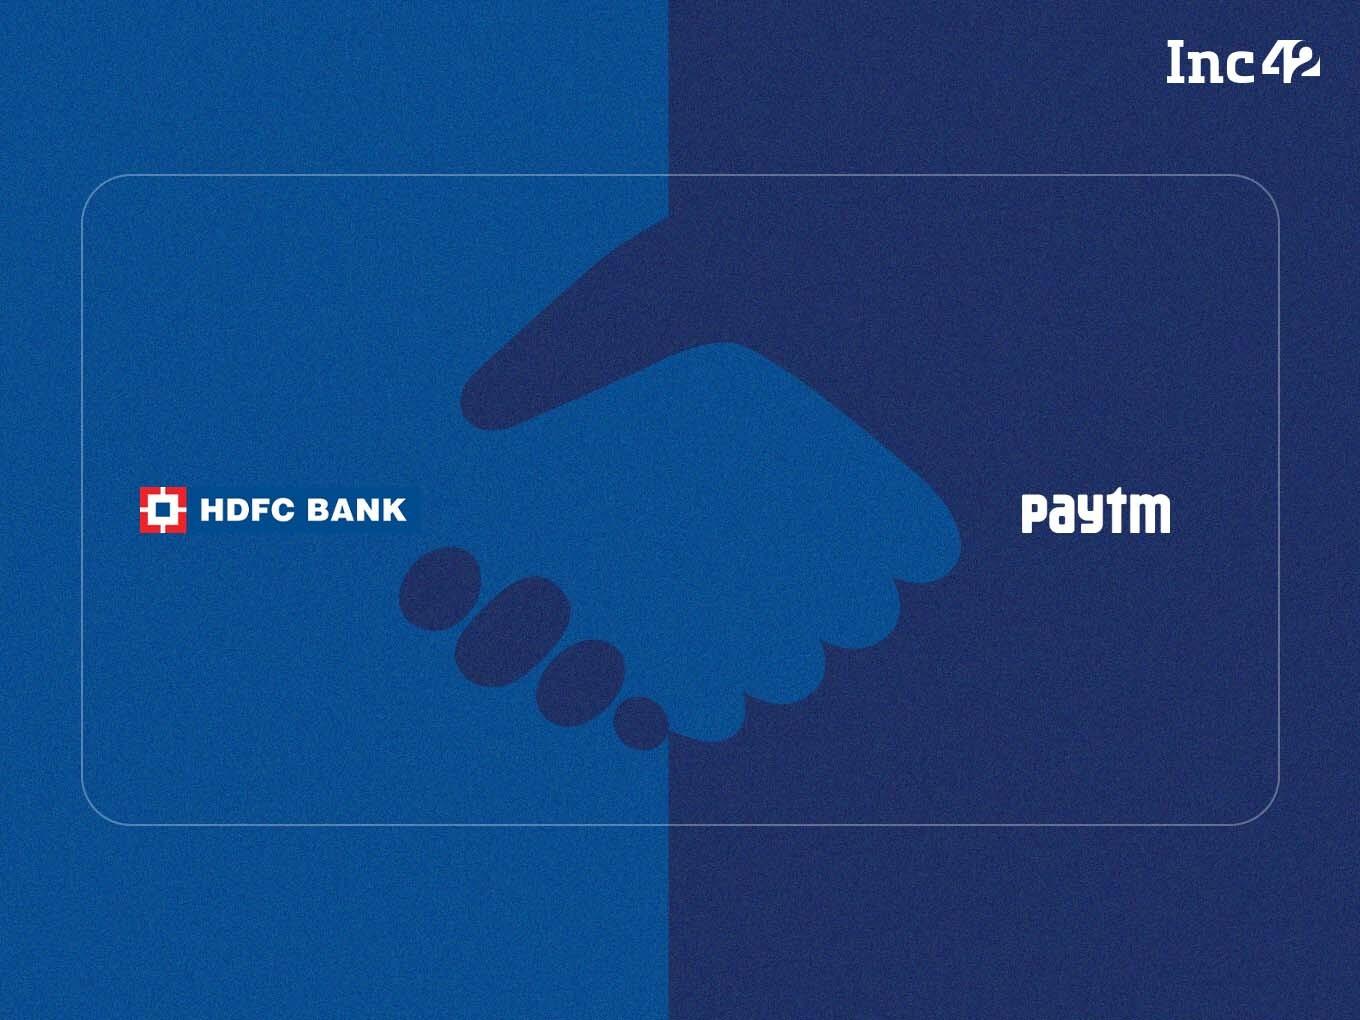 IPO-Bound Paytm To Launch Co-Branded Credit Cards With HDFC Bank In Festive Season